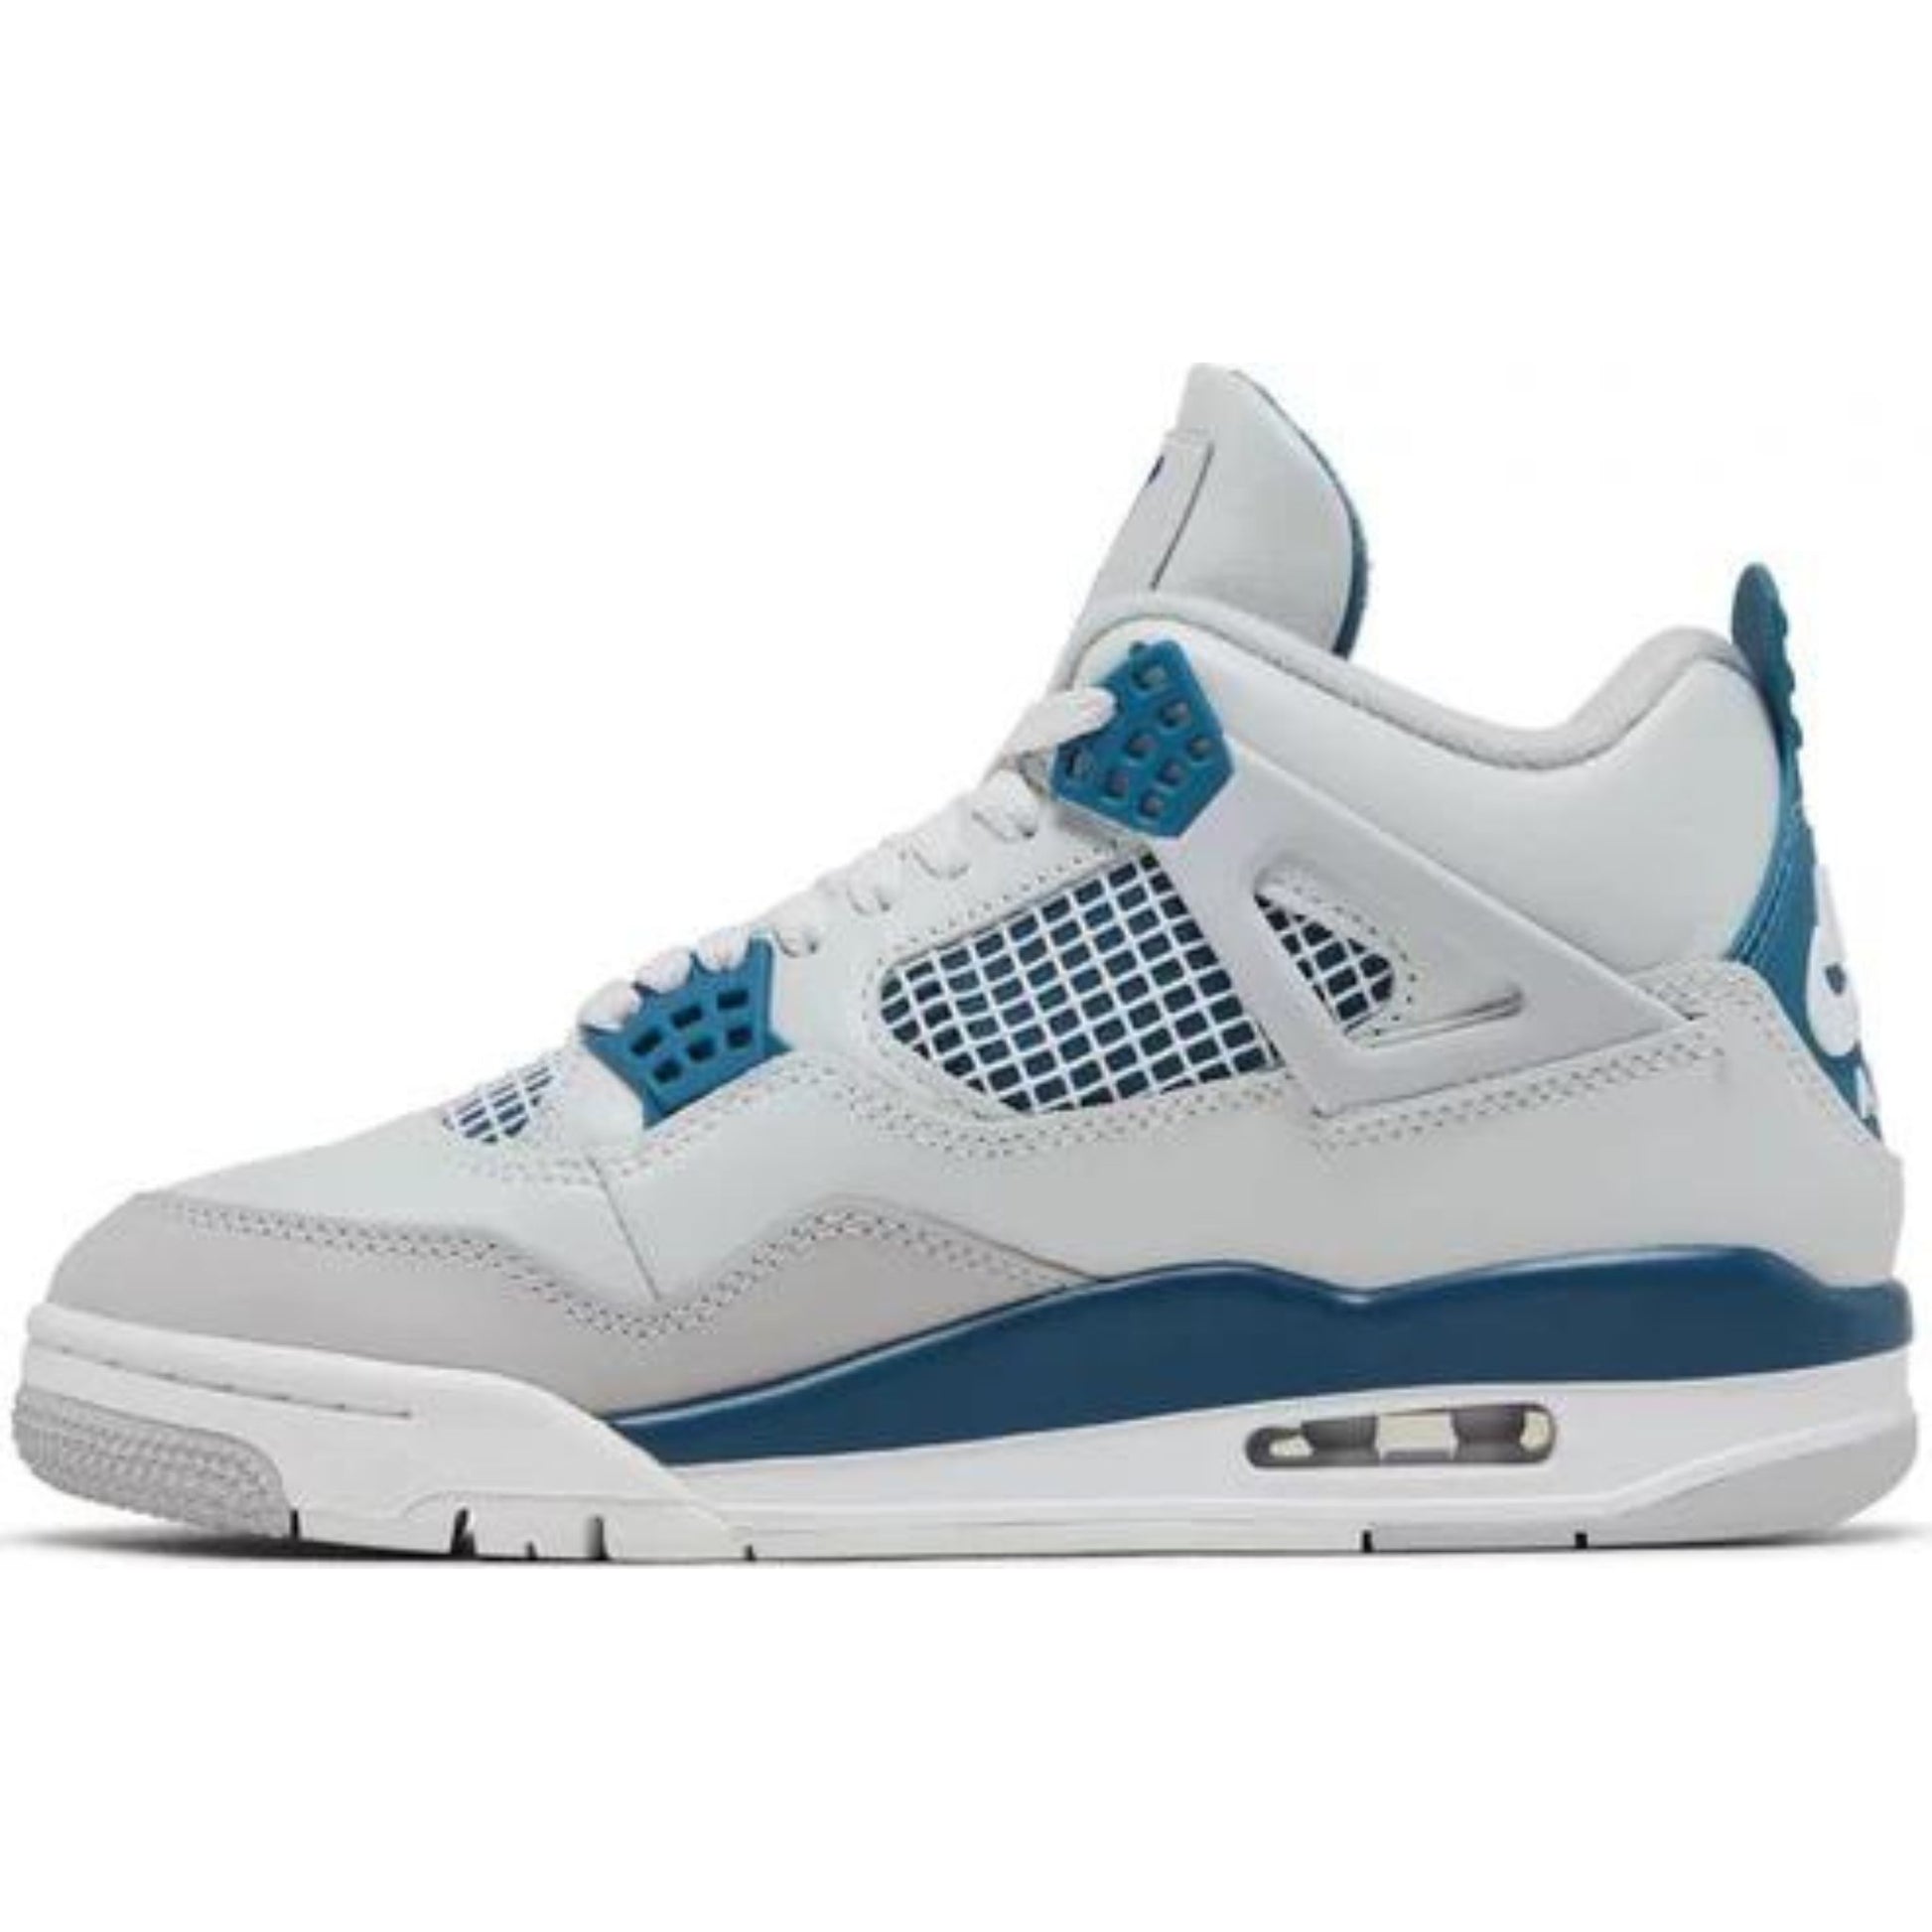 Classic Air Jordan 4 Retro White Blue kicks, white leather upper with blue detailing, a timeless addition to any sneaker collection